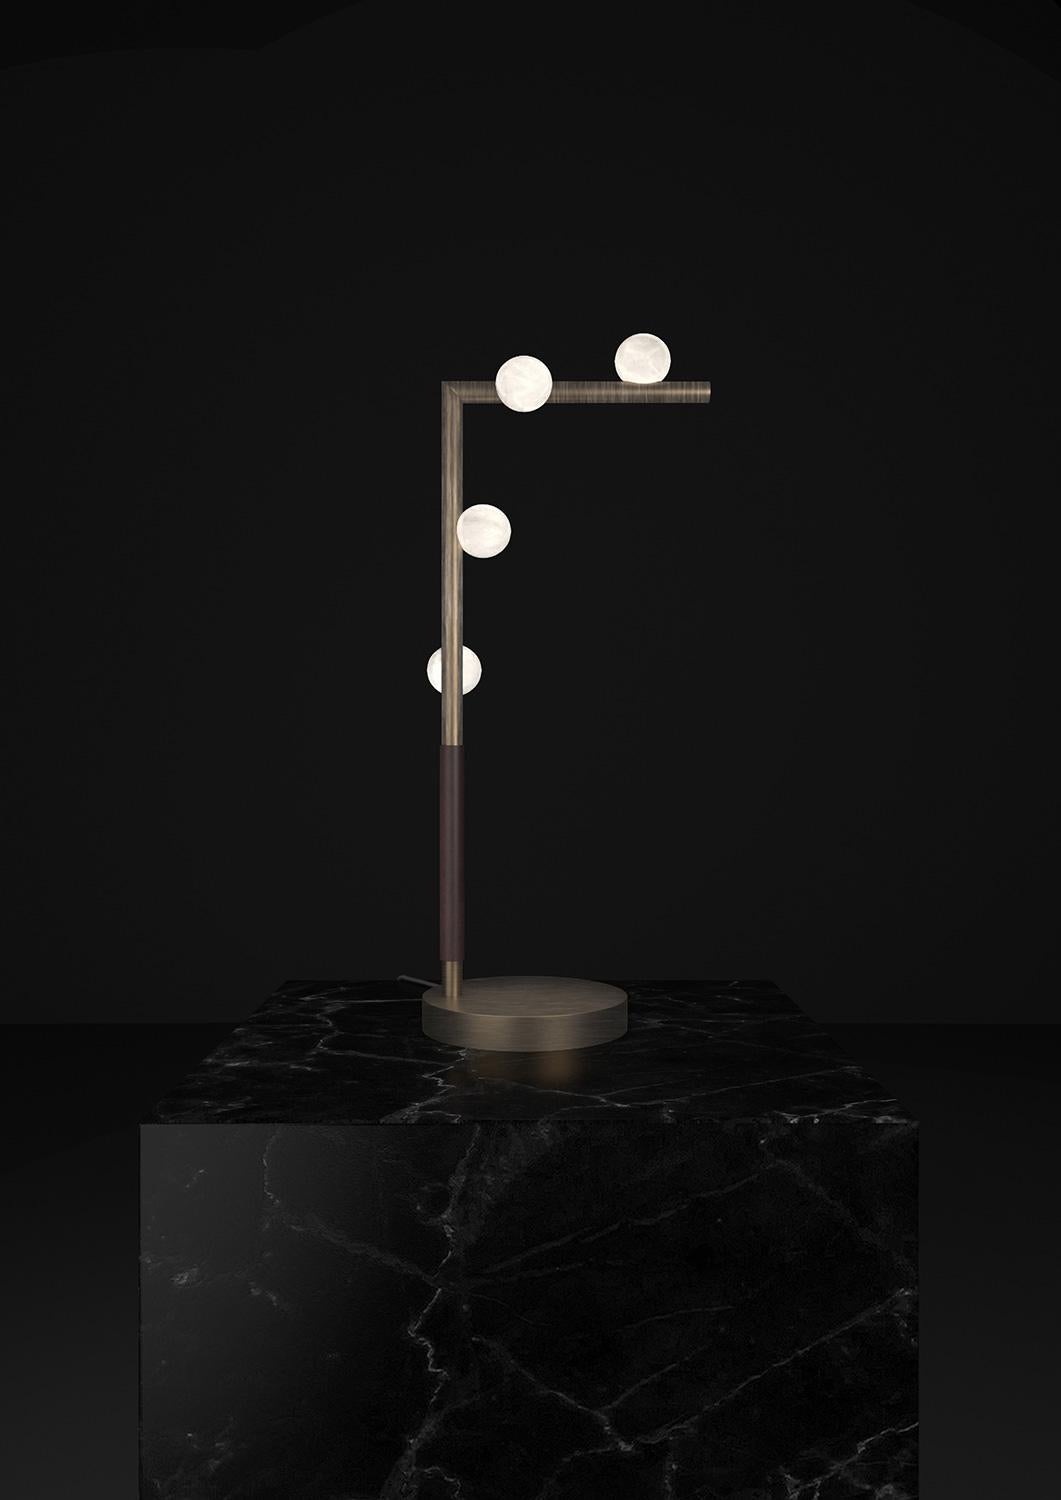 Demetra Brushed Burnished Metal Table Lamp by Alabastro Italiano
Dimensions: D 20 x W 35 x H 67 cm.
Materials: White alabaster, metal and leather.

Available in different finishes: Shiny Silver, Bronze, Brushed Brass, Ruggine of Florence, Brushed